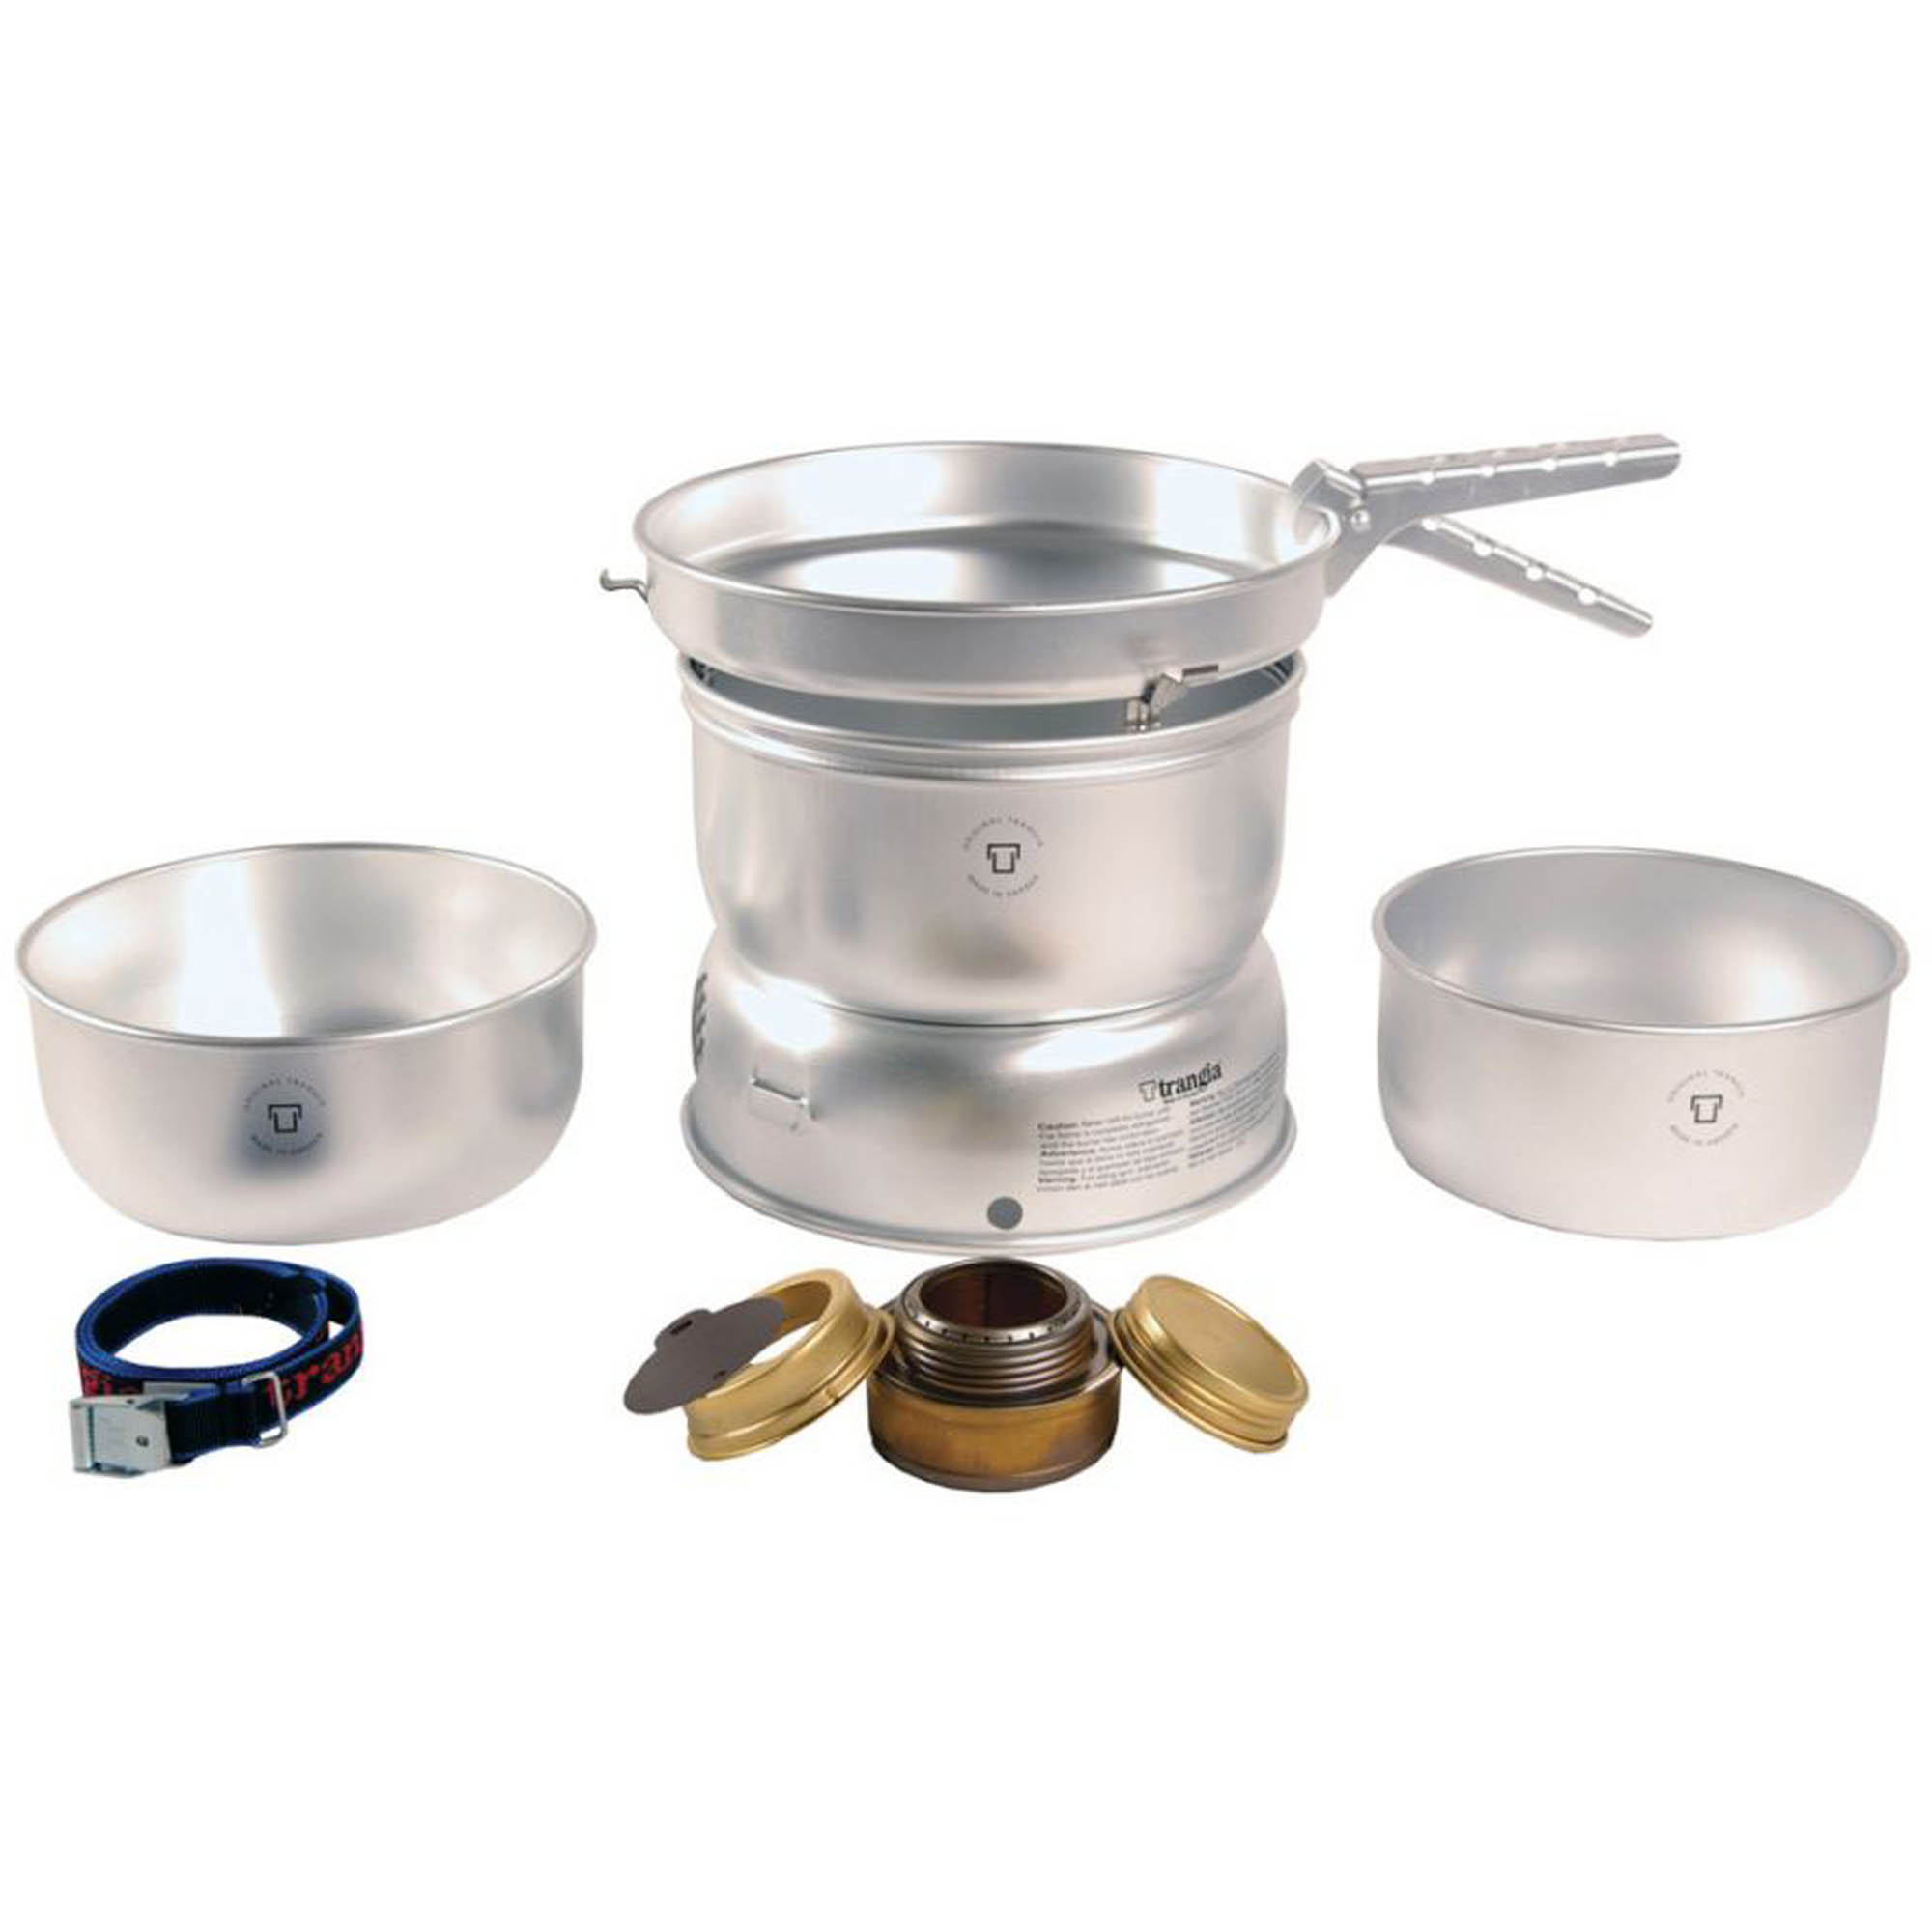 Trangia 27-1 Compact Stove System & Cookware